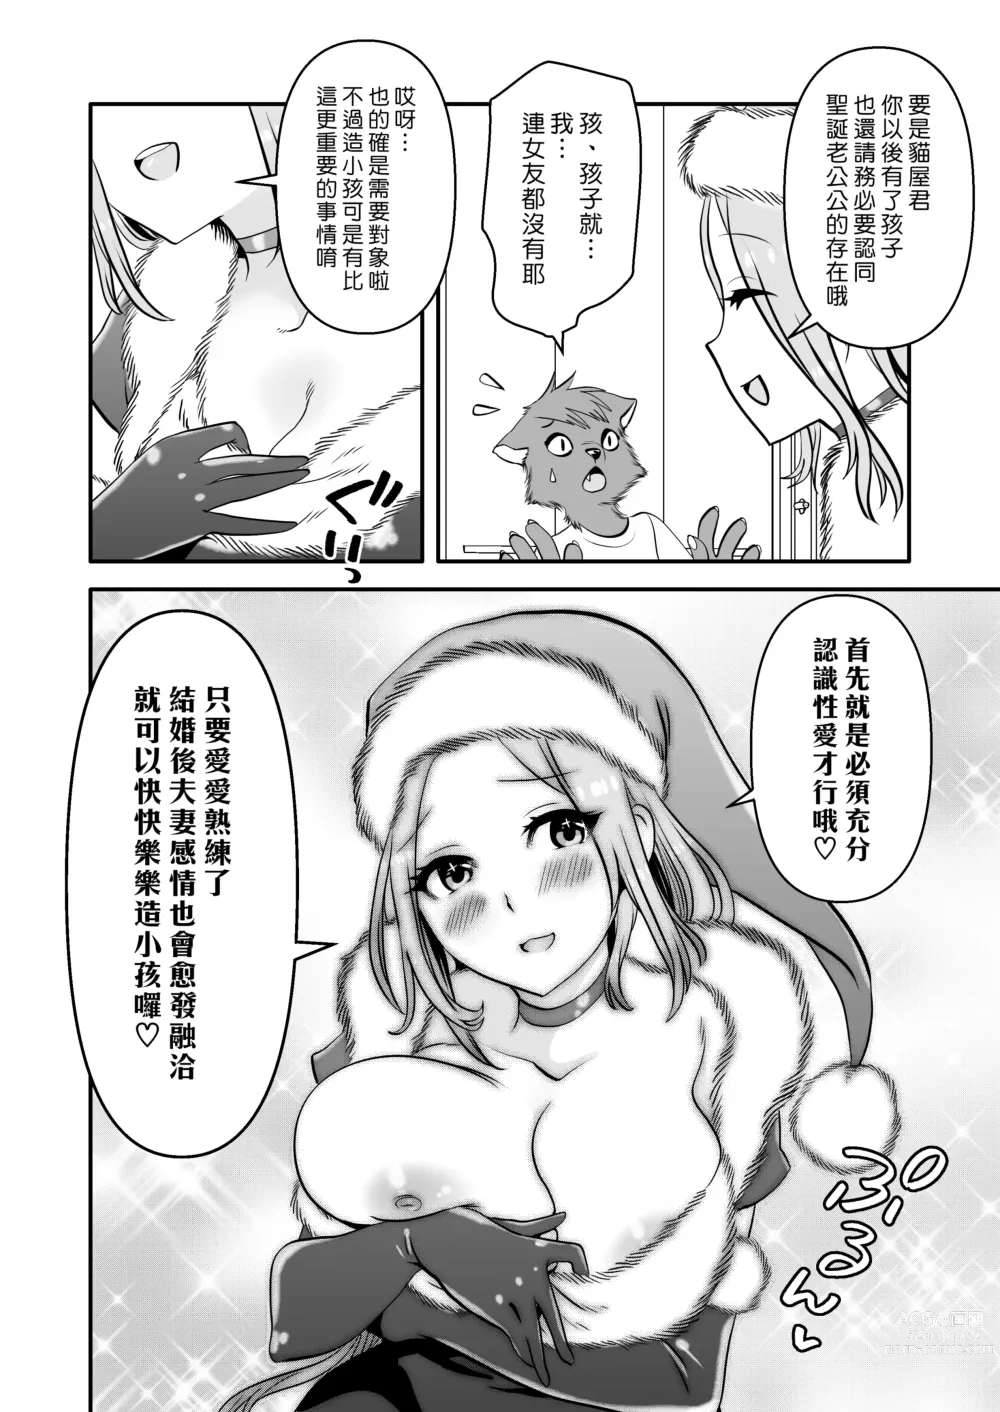 Page 7 of doujinshi 獸人君與聖誕大姊姊